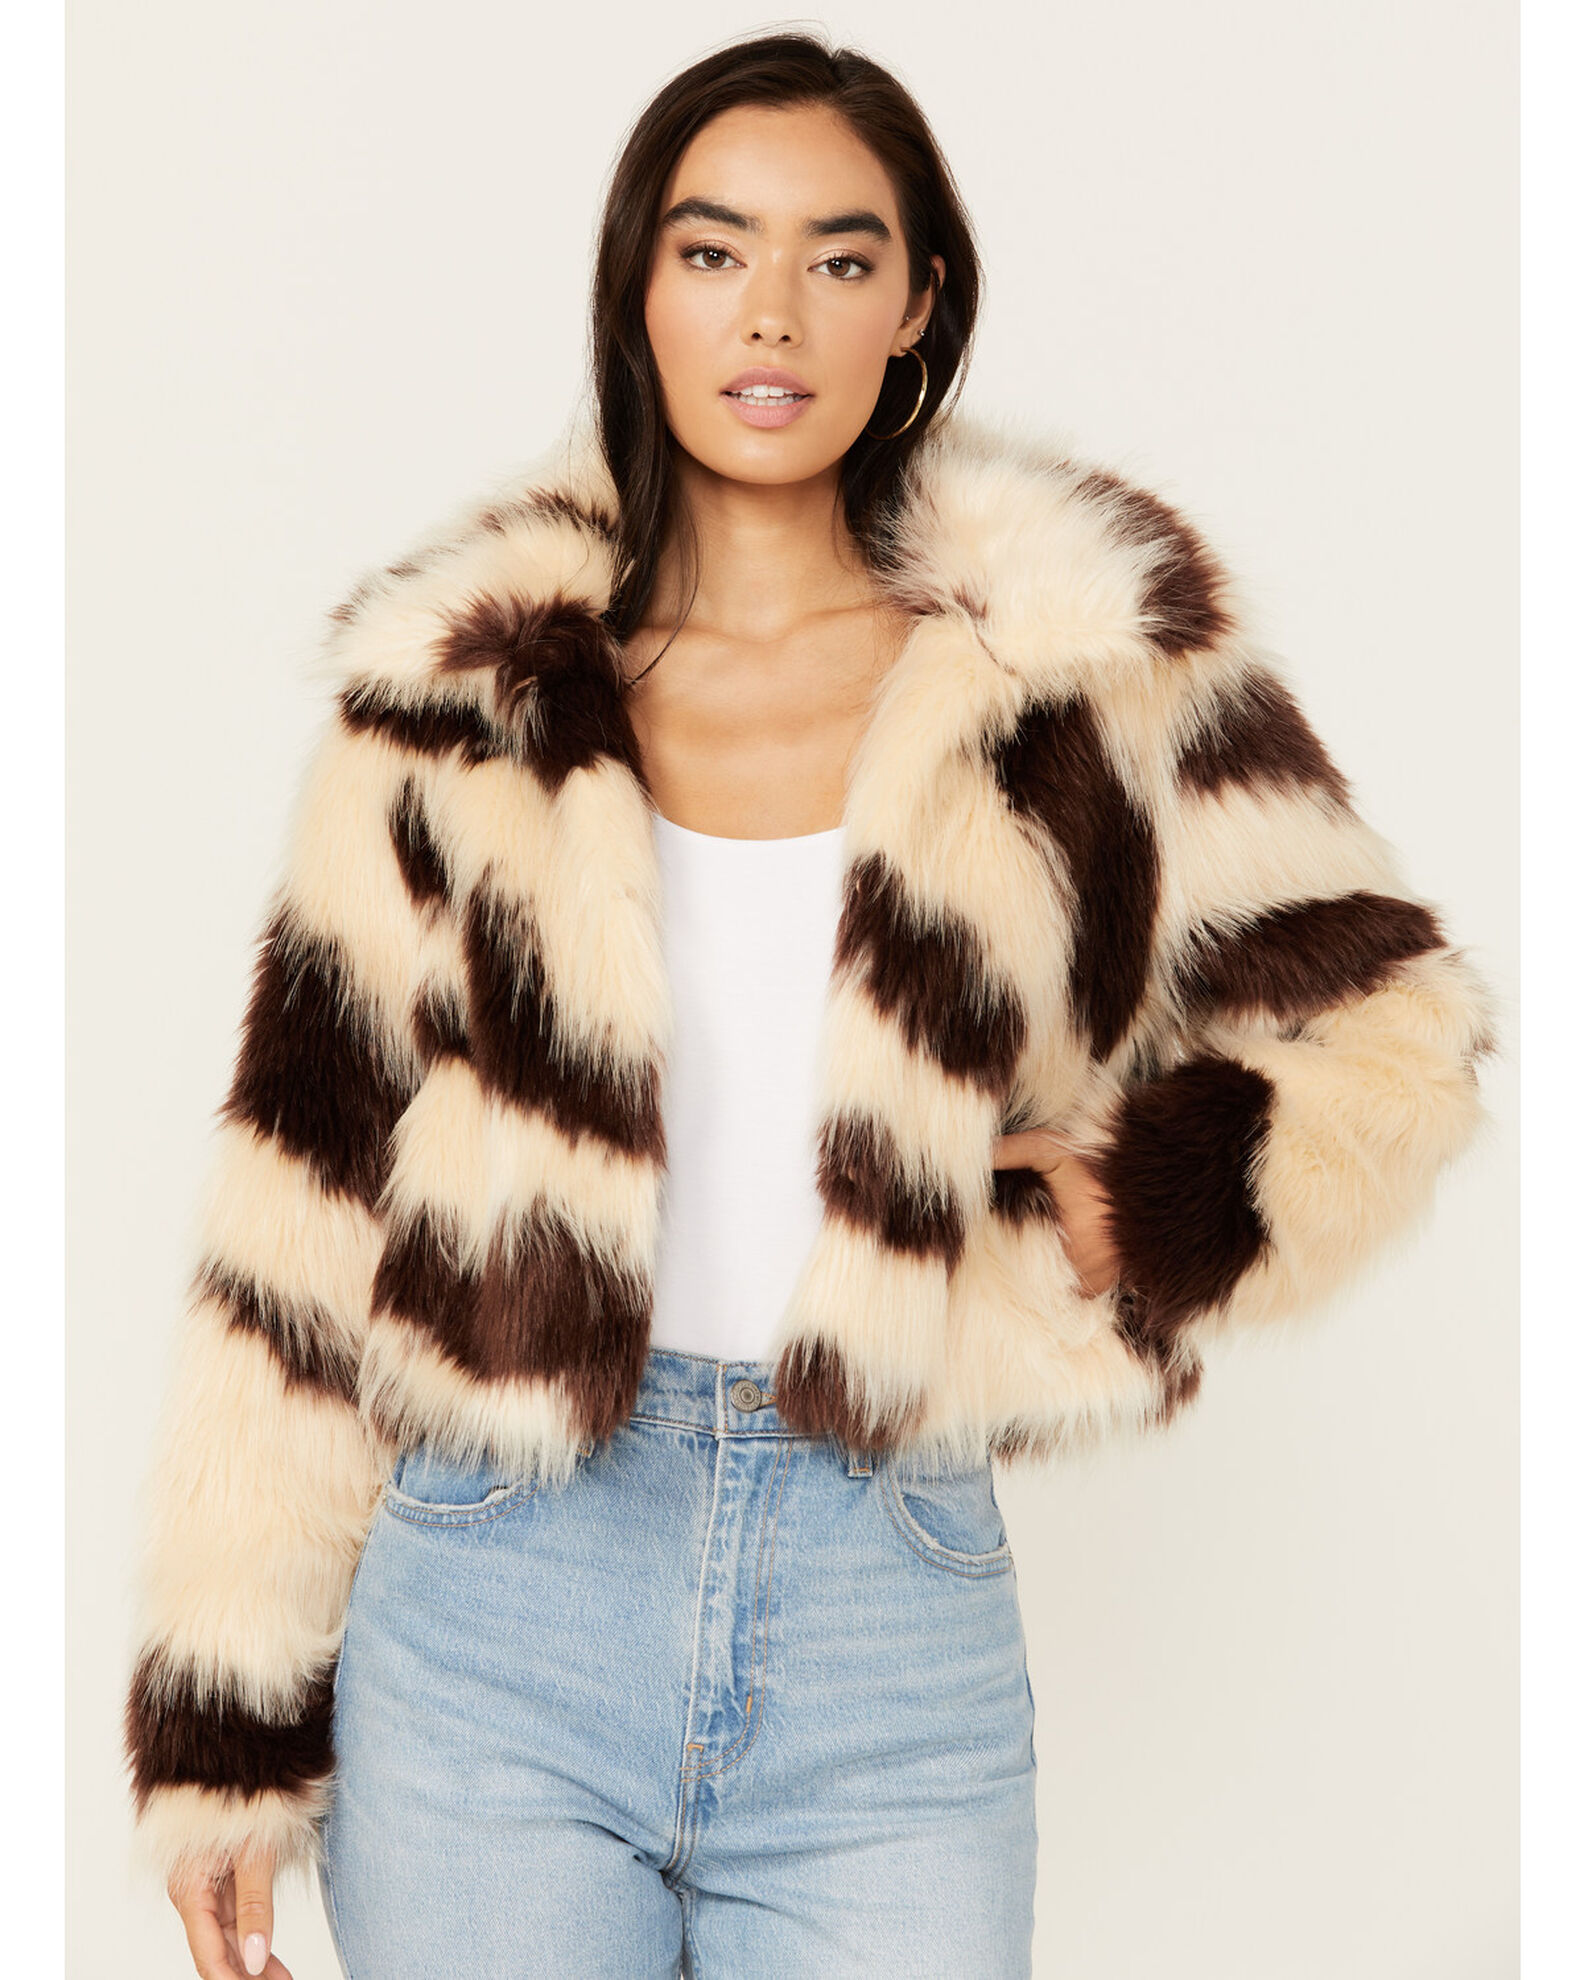 Band of the Free Women's Agnes Faux Fur Jacket